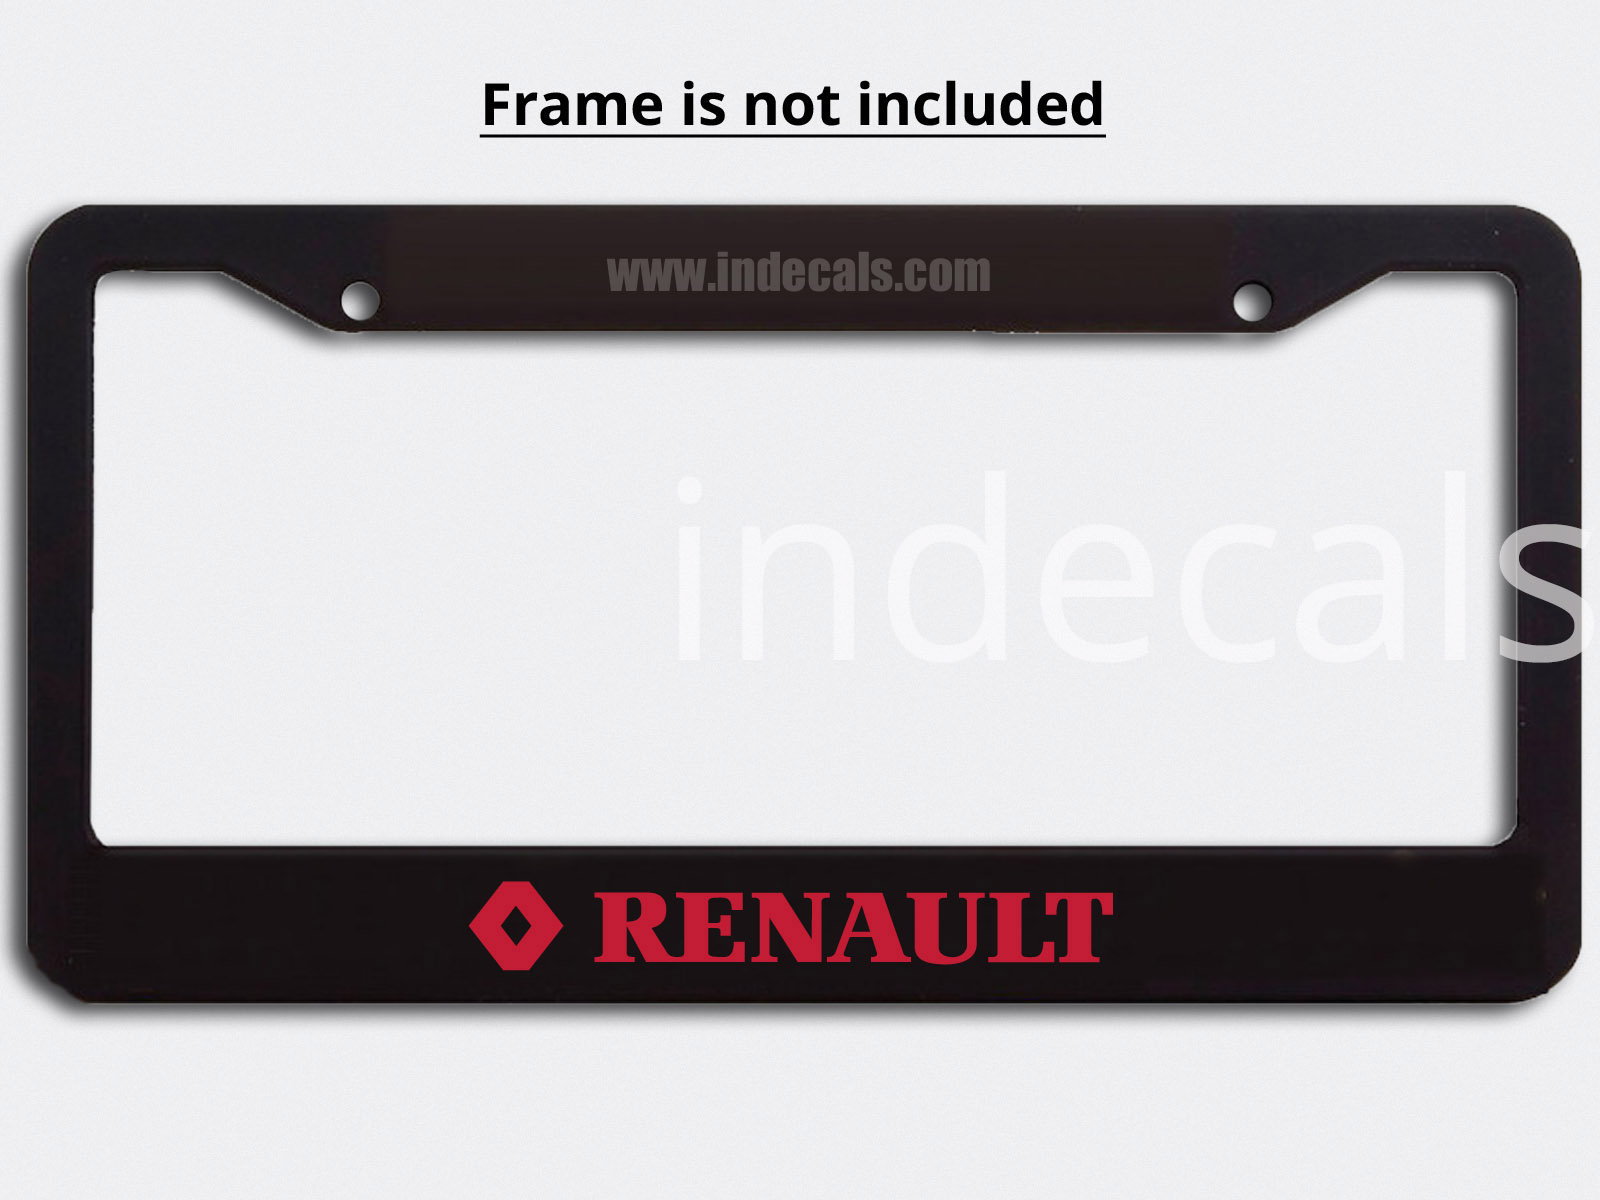 3 x Renault Stickers for Plate Frame - Red